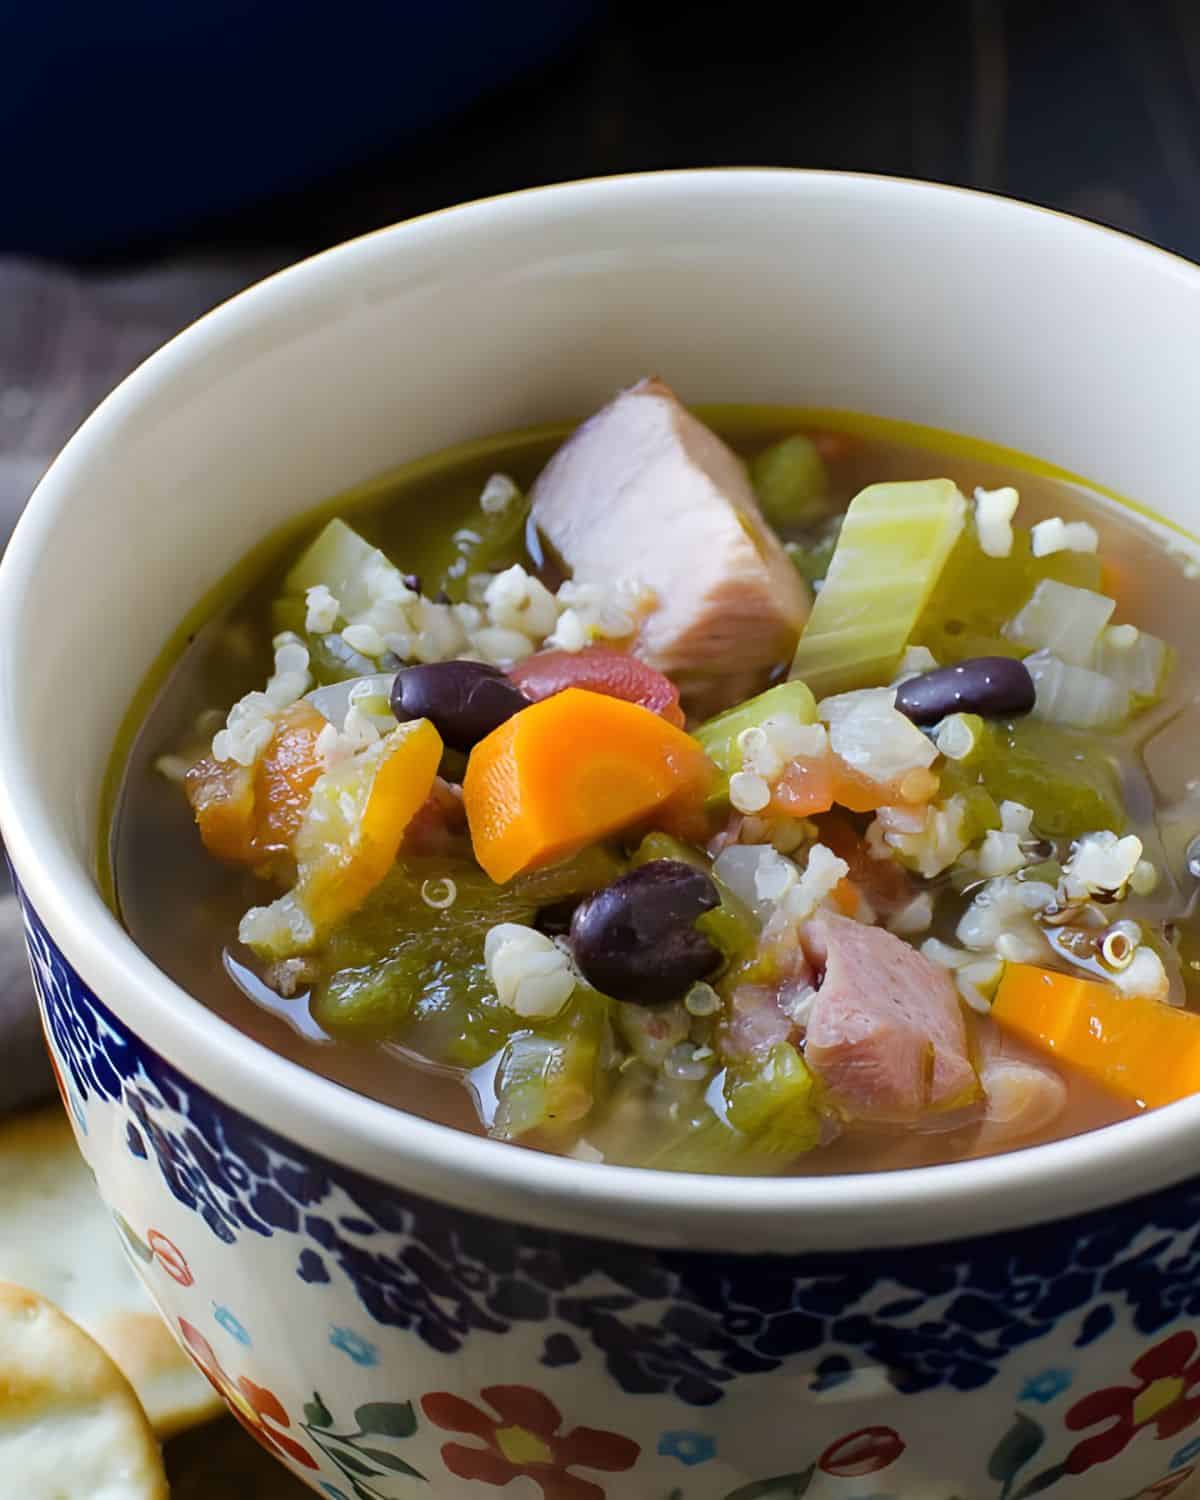 The ham soup with whole grains and black beans in a cup.